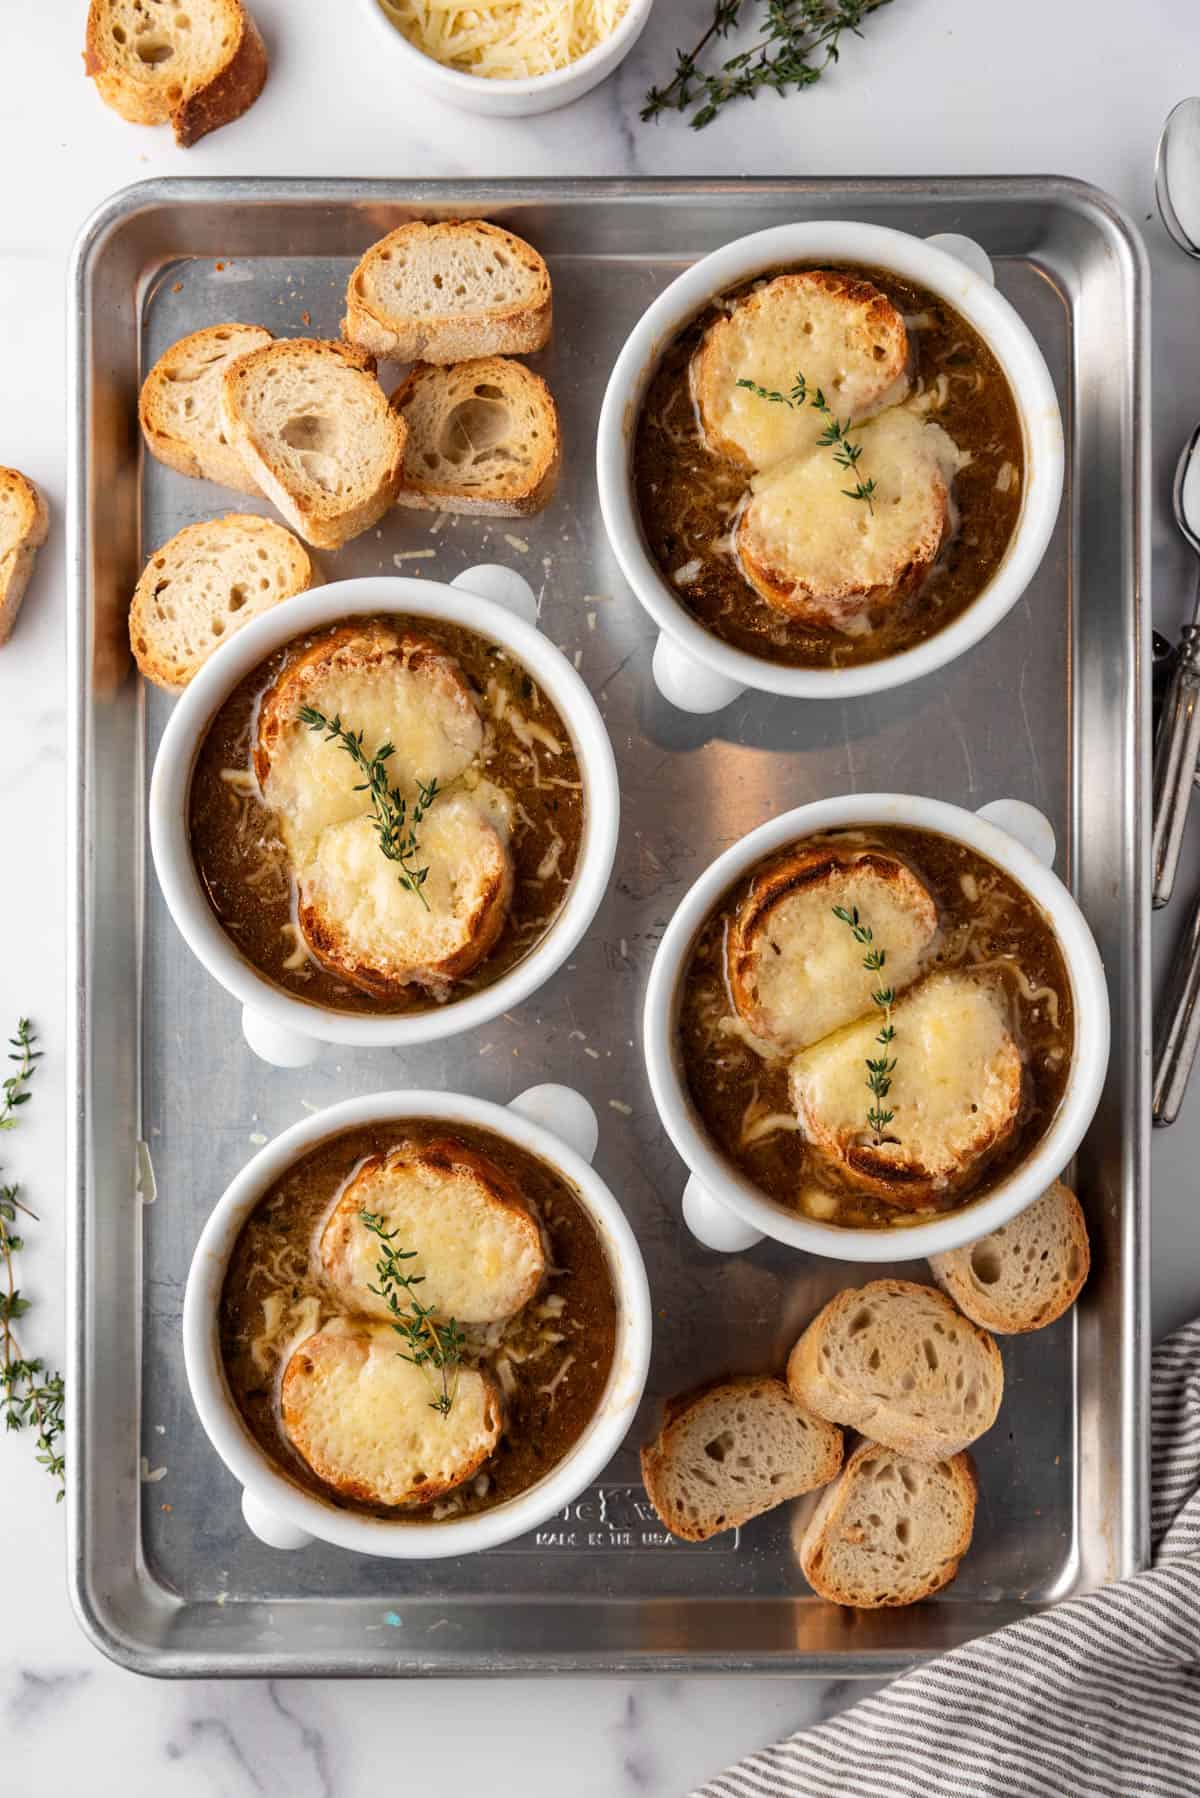 Finished French onion soup in separate bowls on a baking sheet.